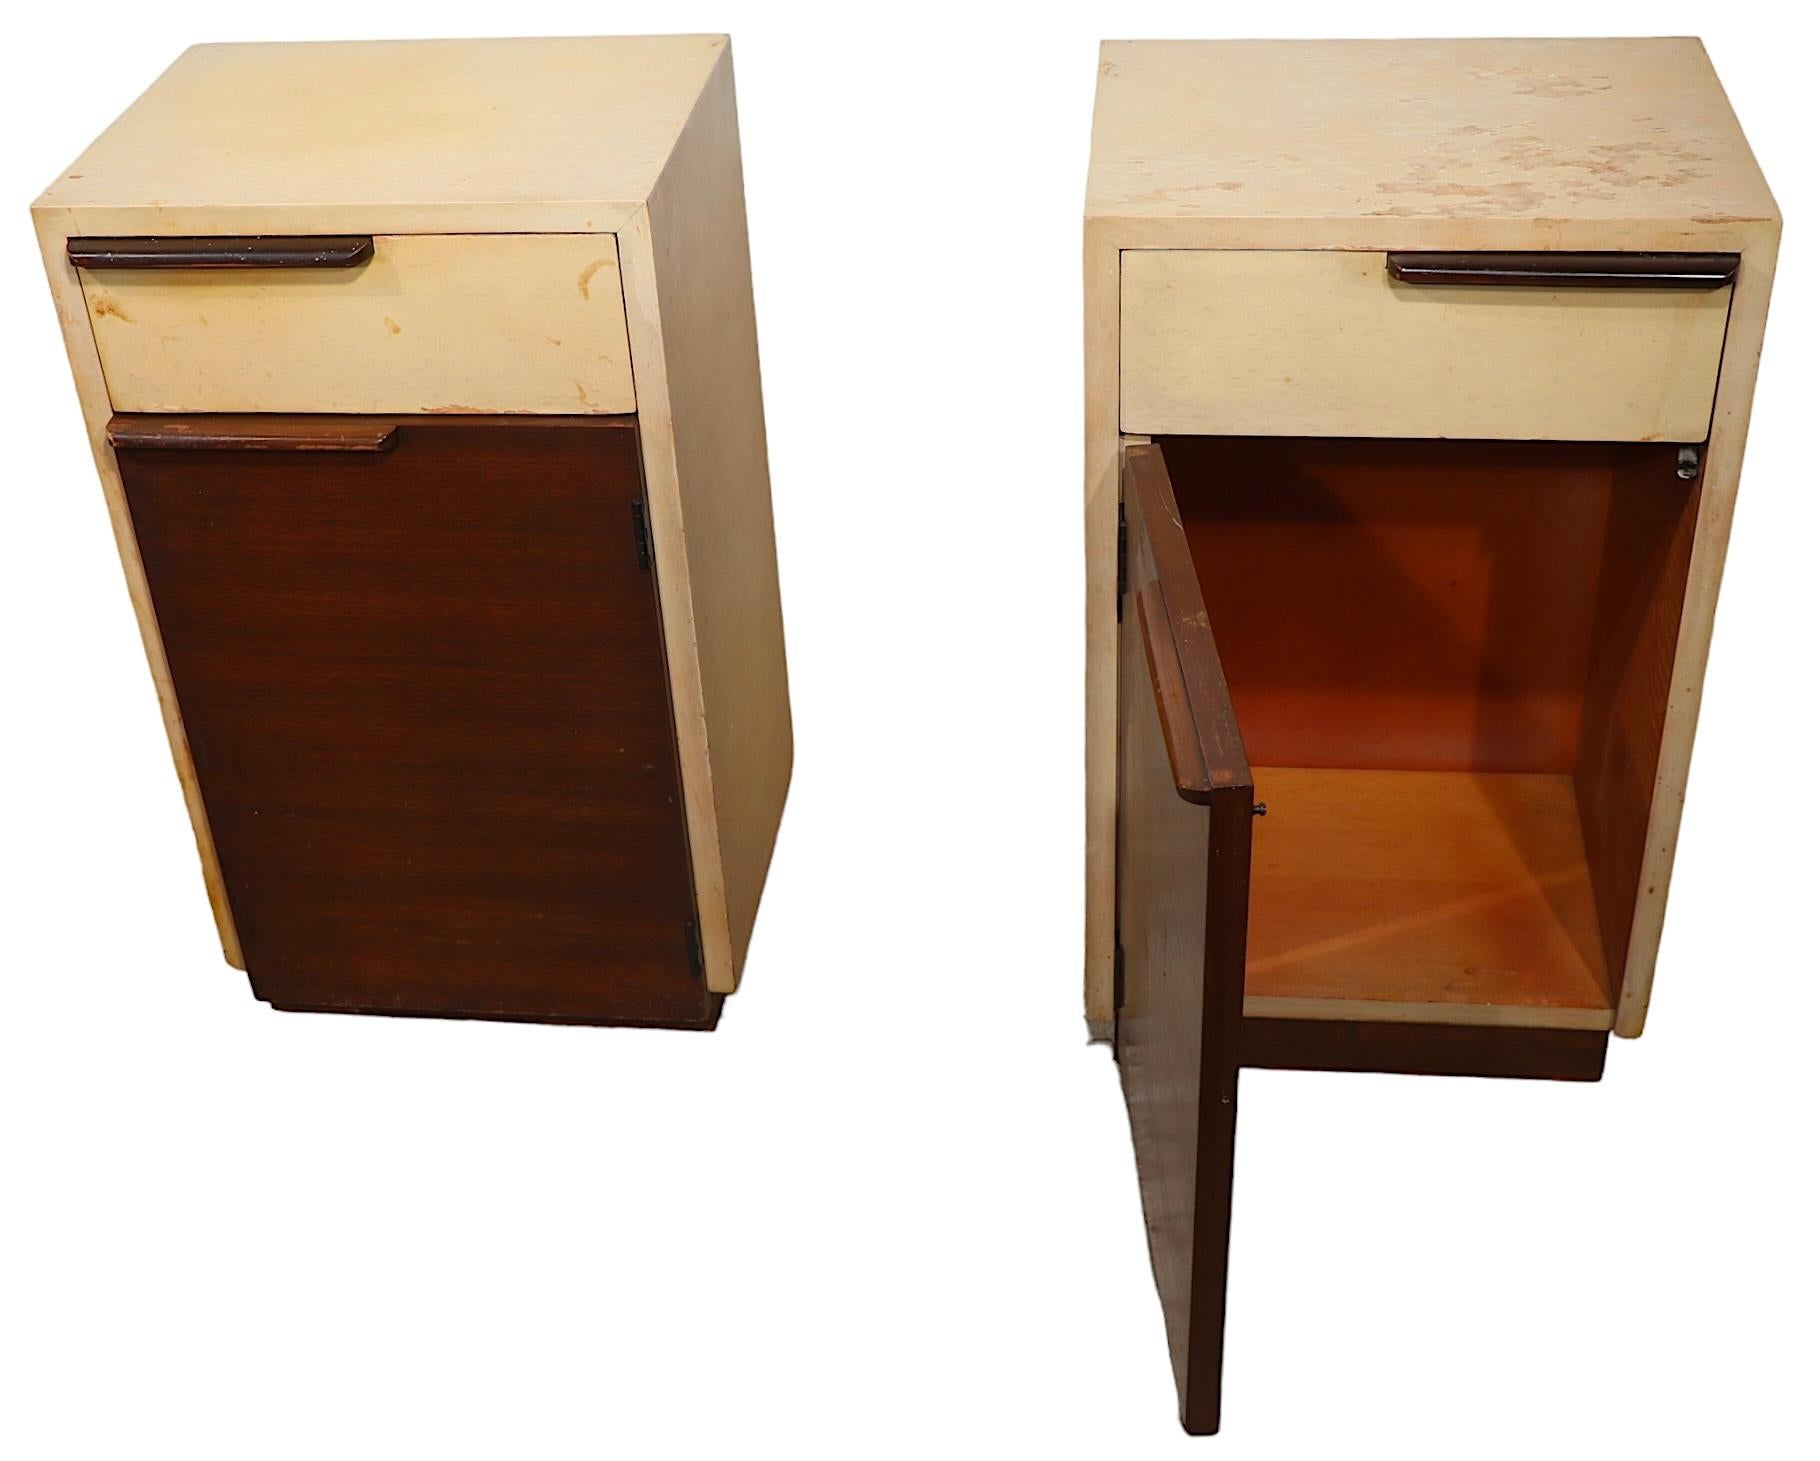 Pr. Art Deco Art Moderne Two Tone Night Stand Tables by Rohde for Herman Miller  9